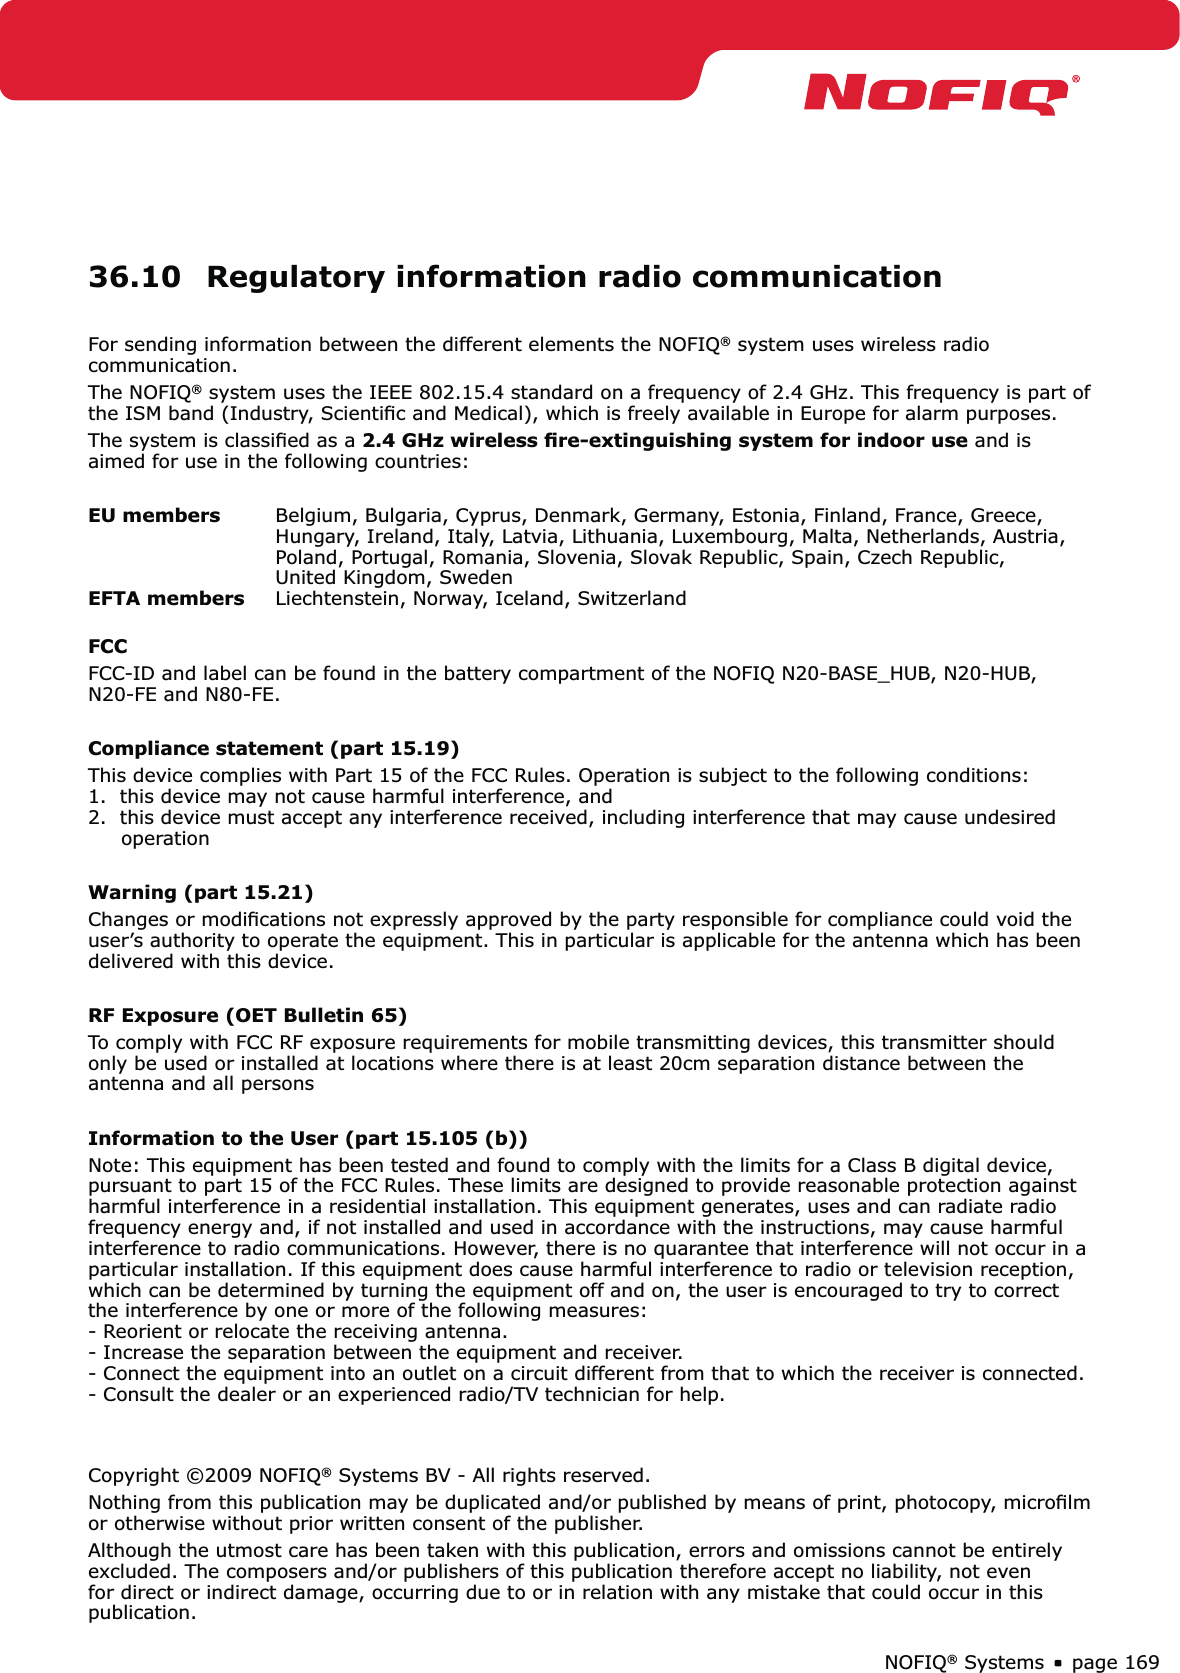 page 169NOFIQ® Systems36.10  Regulatory information radio communicationFor sending information between the different elements the NOFIQ® system uses wireless radio communication.The NOFIQ® system uses the IEEE 802.15.4 standard on a frequency of 2.4 GHz. This frequency is part of the ISM band (Industry, Scientiﬁc and Medical), which is freely available in Europe for alarm purposes.The system is classiﬁed as a 2.4 GHz wireless ﬁre-extinguishing system for indoor use and is aimed for use in the following countries:EU members  Belgium, Bulgaria, Cyprus, Denmark, Germany, Estonia, Finland, France, Greece,      Hungary, Ireland, Italy, Latvia, Lithuania, Luxembourg, Malta, Netherlands, Austria,   Poland, Portugal, Romania, Slovenia, Slovak Republic, Spain, Czech Republic,   United Kingdom, SwedenEFTA members  Liechtenstein, Norway, Iceland, SwitzerlandFCCFCC-ID and label can be found in the battery compartment of the NOFIQ N20-BASE_HUB, N20-HUB,  N20-FE and N80-FE.Compliance statement (part 15.19)This device complies with Part 15 of the FCC Rules. Operation is subject to the following conditions: 1.  this device may not cause harmful interference, and 2.  this device must accept any interference received, including interference that may cause undesired       operationWarning (part 15.21)Changes or modiﬁcations not expressly approved by the party responsible for compliance could void the user’s authority to operate the equipment. This in particular is applicable for the antenna which has been delivered with this device.RF Exposure (OET Bulletin 65)To comply with FCC RF exposure requirements for mobile transmitting devices, this transmitter should only be used or installed at locations where there is at least 20cm separation distance between the antenna and all personsInformation to the User (part 15.105 (b))Note: This equipment has been tested and found to comply with the limits for a Class B digital device, pursuant to part 15 of the FCC Rules. These limits are designed to provide reasonable protection against harmful interference in a residential installation. This equipment generates, uses and can radiate radio frequency energy and, if not installed and used in accordance with the instructions, may cause harmful interference to radio communications. However, there is no quarantee that interference will not occur in a particular installation. If this equipment does cause harmful interference to radio or television reception, which can be determined by turning the equipment off and on, the user is encouraged to try to correct the interference by one or more of the following measures: - Reorient or relocate the receiving antenna. - Increase the separation between the equipment and receiver. - Connect the equipment into an outlet on a circuit different from that to which the receiver is connected. - Consult the dealer or an experienced radio/TV technician for help.Copyright ©2009 NOFIQ® Systems BV - All rights reserved.Nothing from this publication may be duplicated and/or published by means of print, photocopy, microﬁlm or otherwise without prior written consent of the publisher. Although the utmost care has been taken with this publication, errors and omissions cannot be entirely excluded. The composers and/or publishers of this publication therefore accept no liability, not even for direct or indirect damage, occurring due to or in relation with any mistake that could occur in this publication.